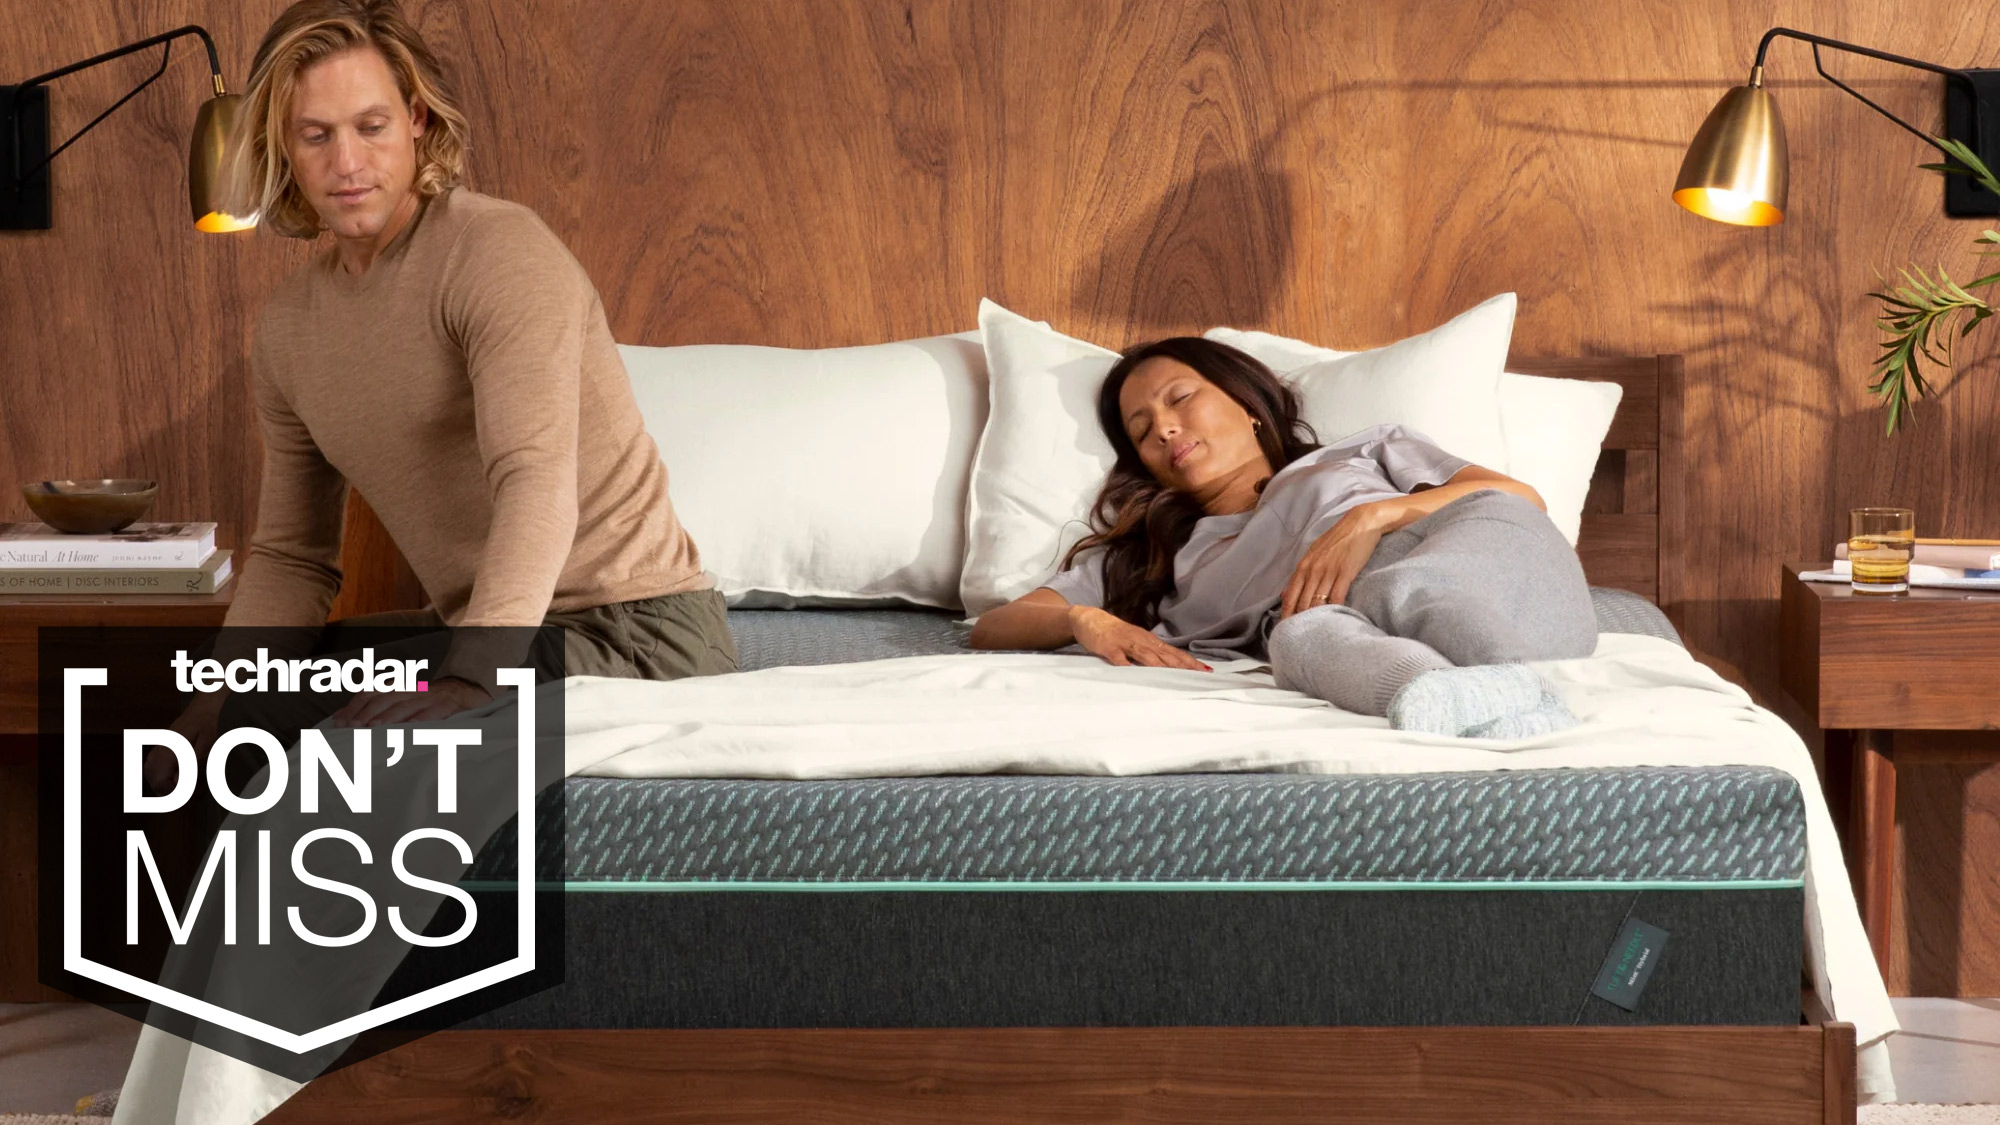 Get up to 700 off a hybrid bed in Tuft & Needle's 4th of July sale